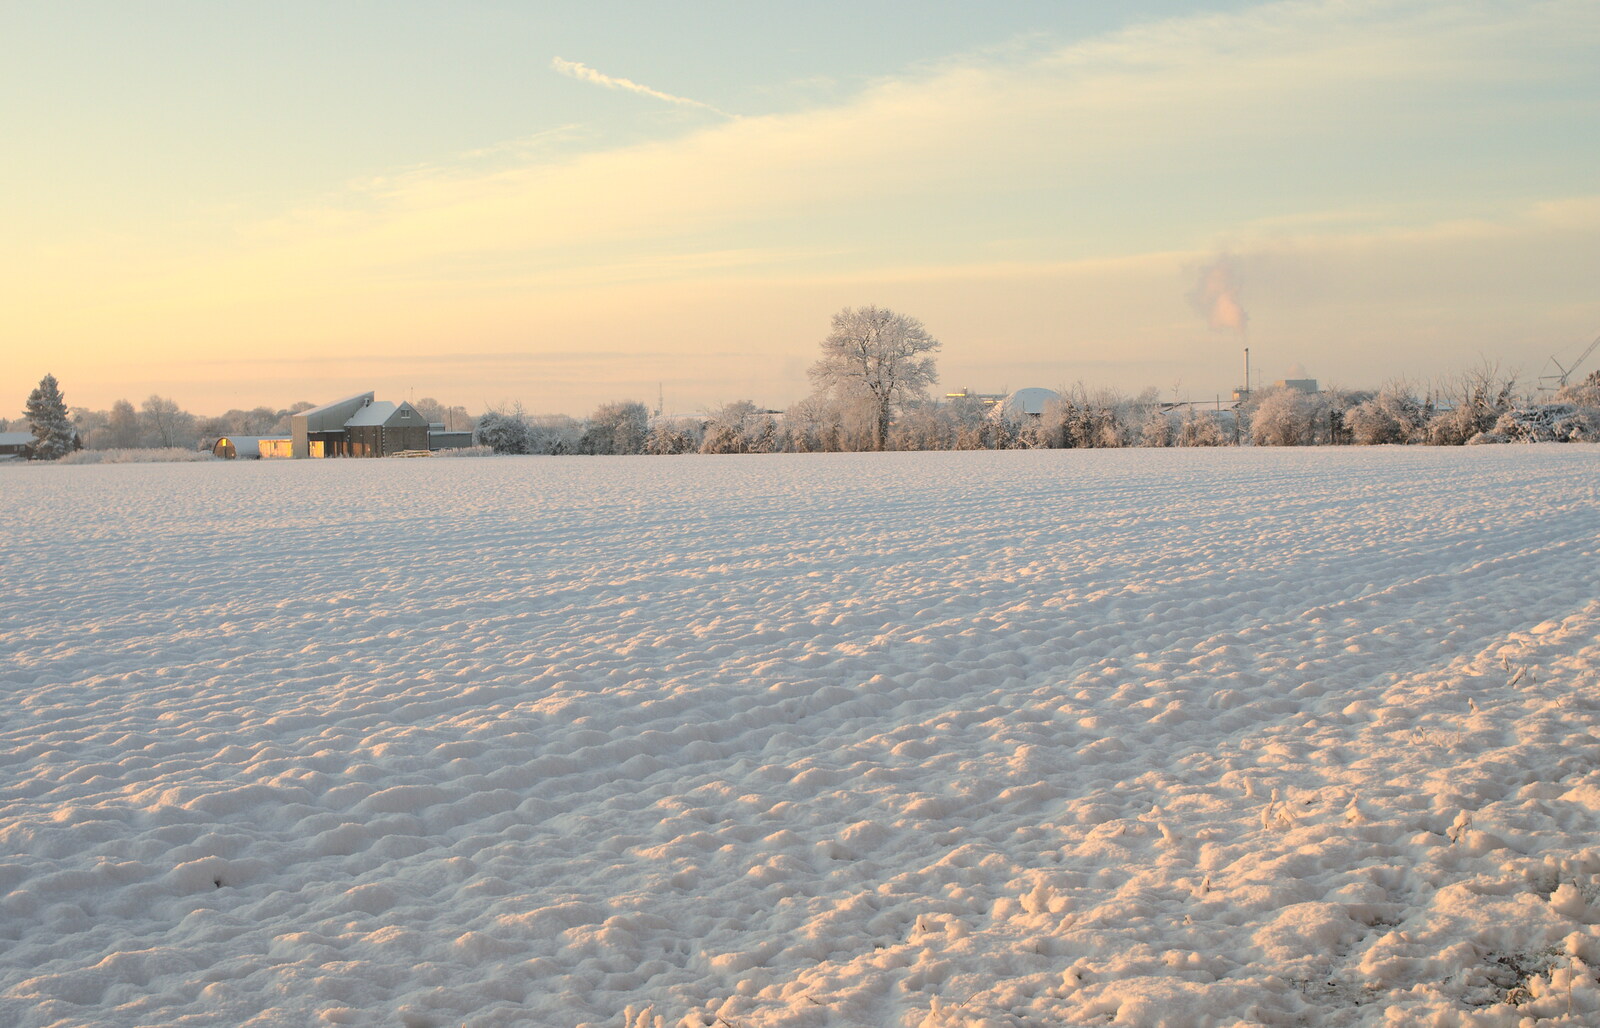 The view over the back field from A Couple of Snow Days, Brome, Suffolk - 16th January 2013